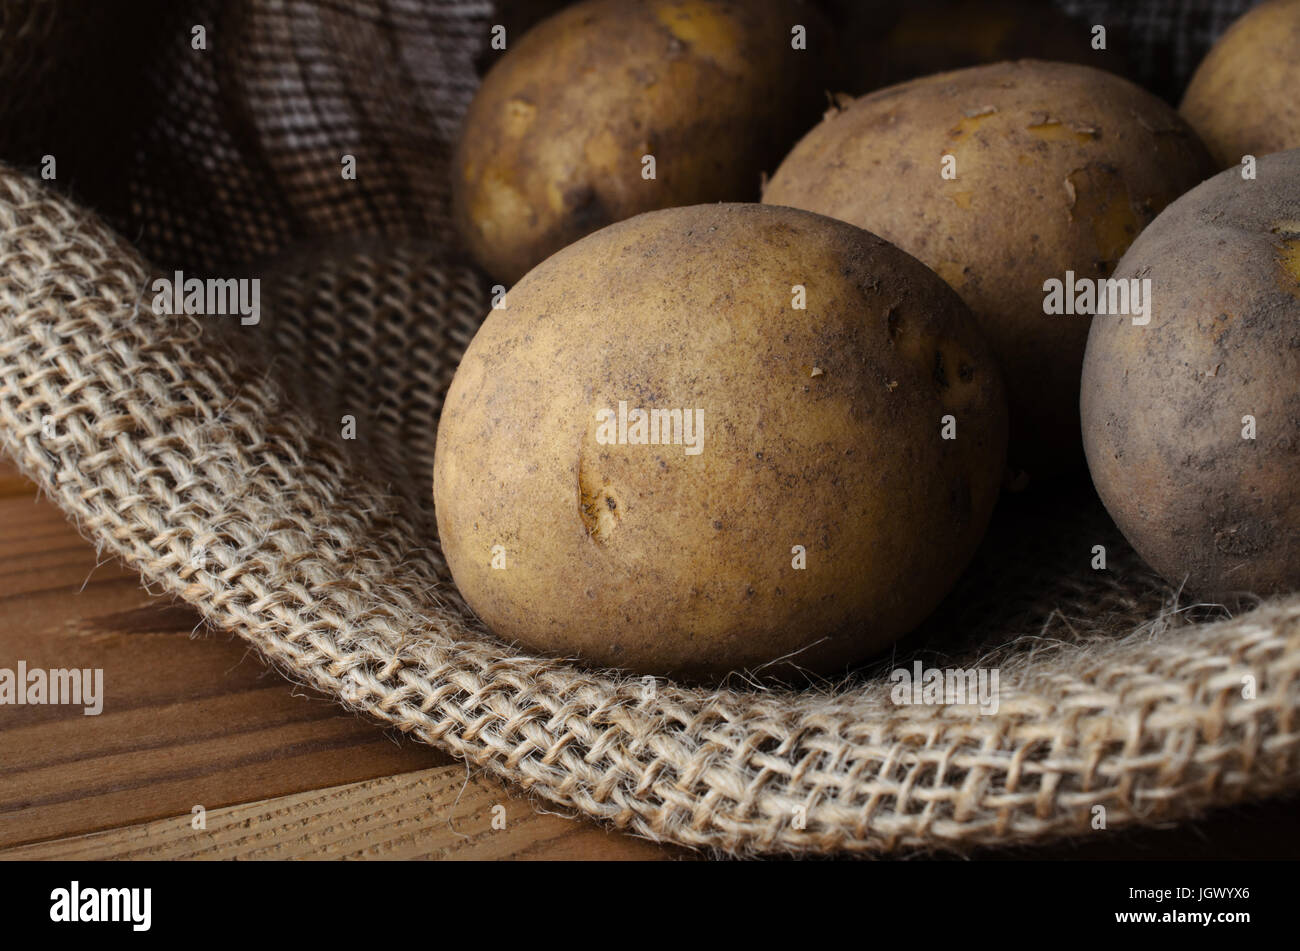 Raw, unwashed, unpeeled potatoes in opened hessian sack, lain on wood planked table. Stock Photo